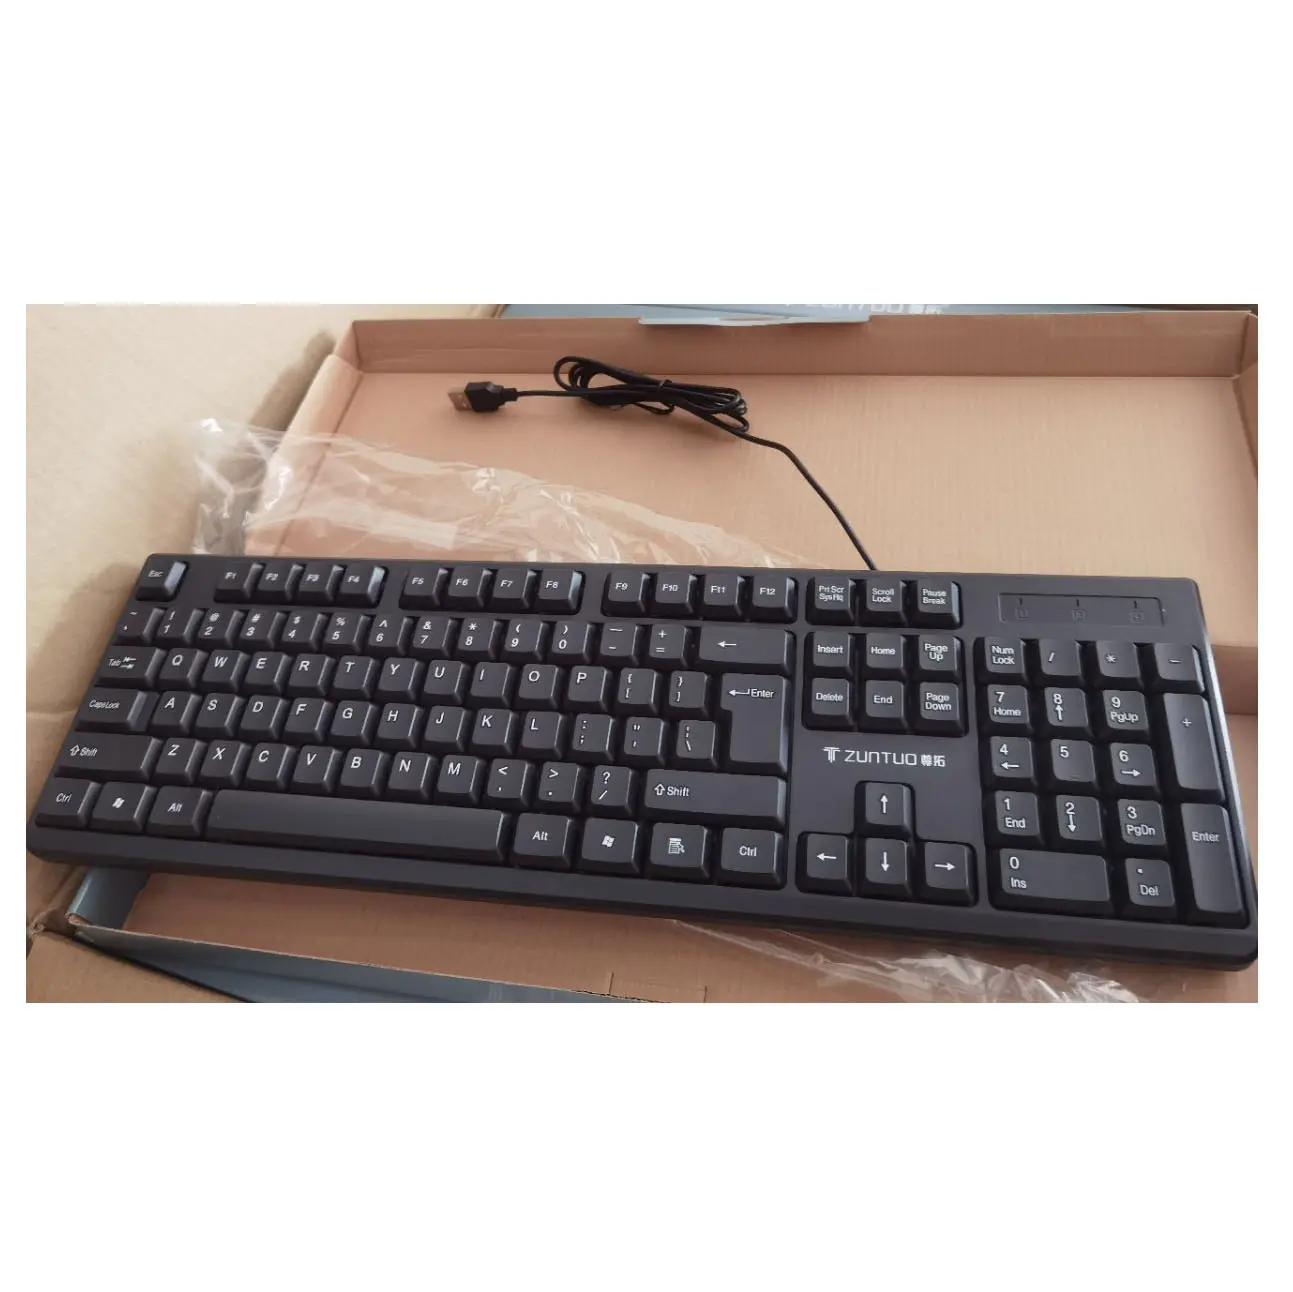 Spot wholesale high quality affordable wired keyboard notebook desktop computer business office portable universal USB keyboard